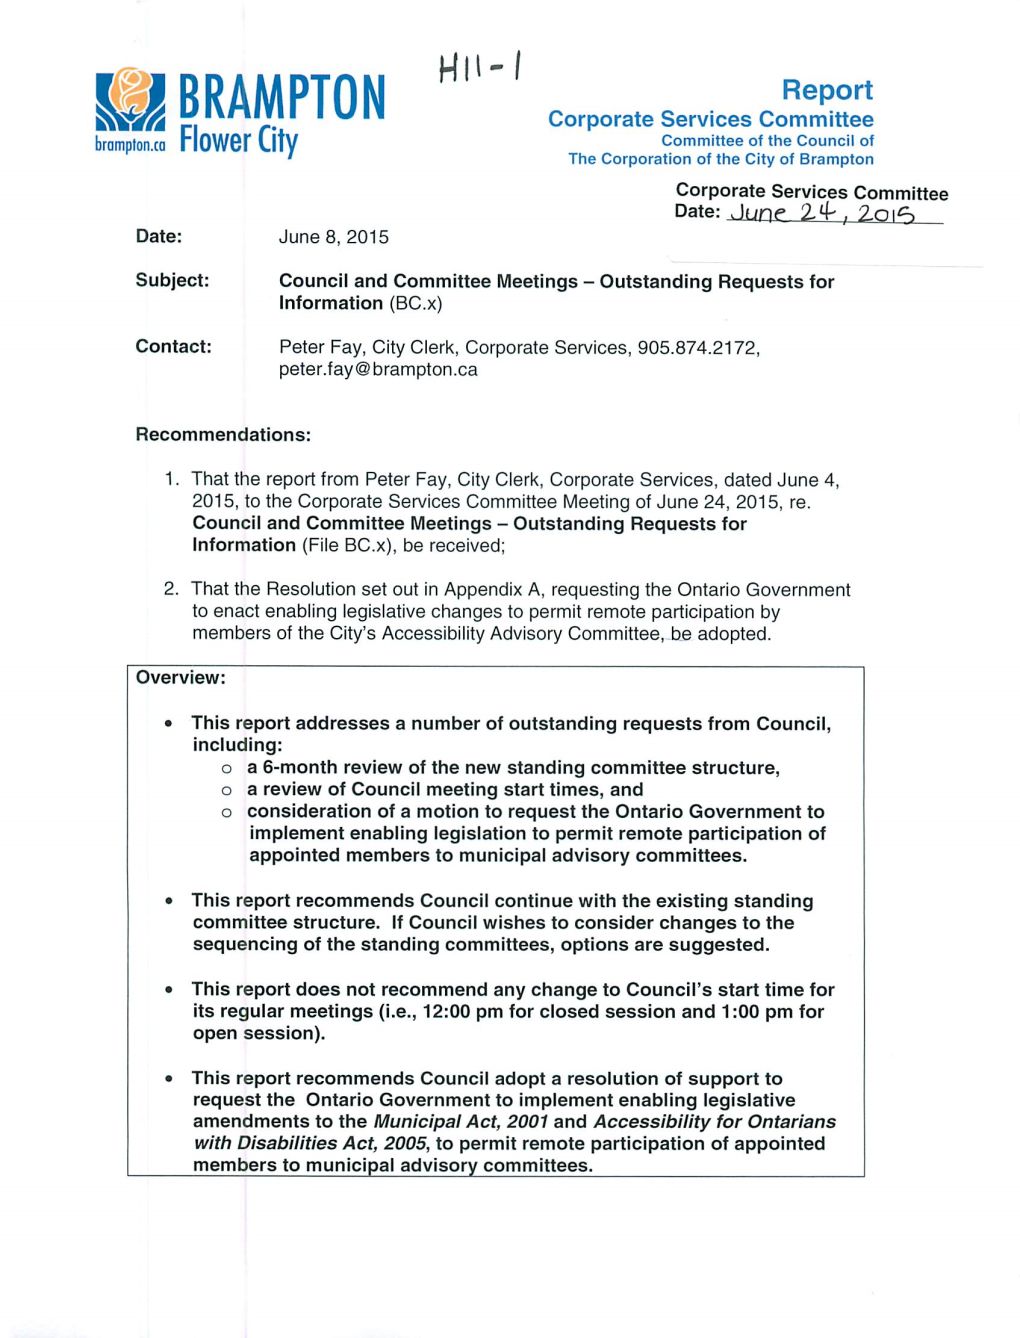 Corporate Services Committee Item H11 for June 24